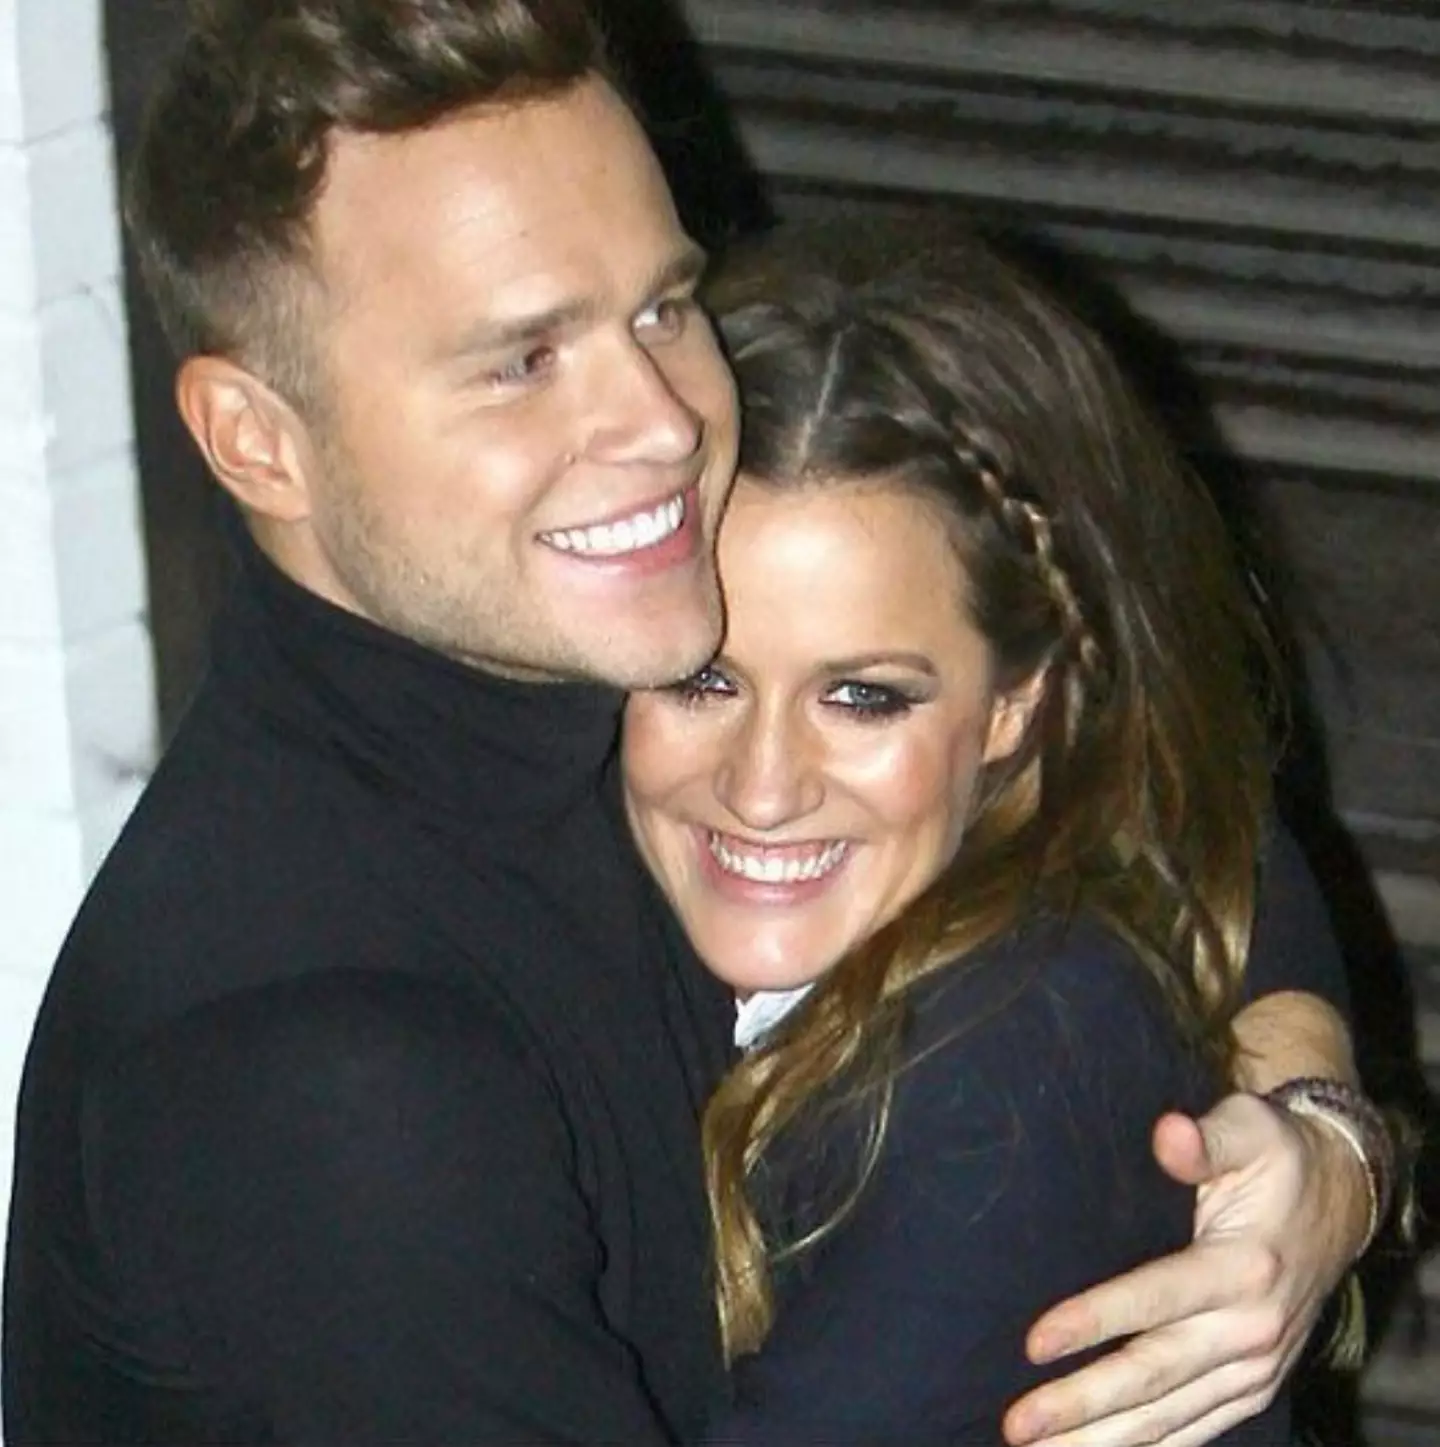 Olly Murs was good friends with Caroline Flack, who tragically took her own life in 2020.